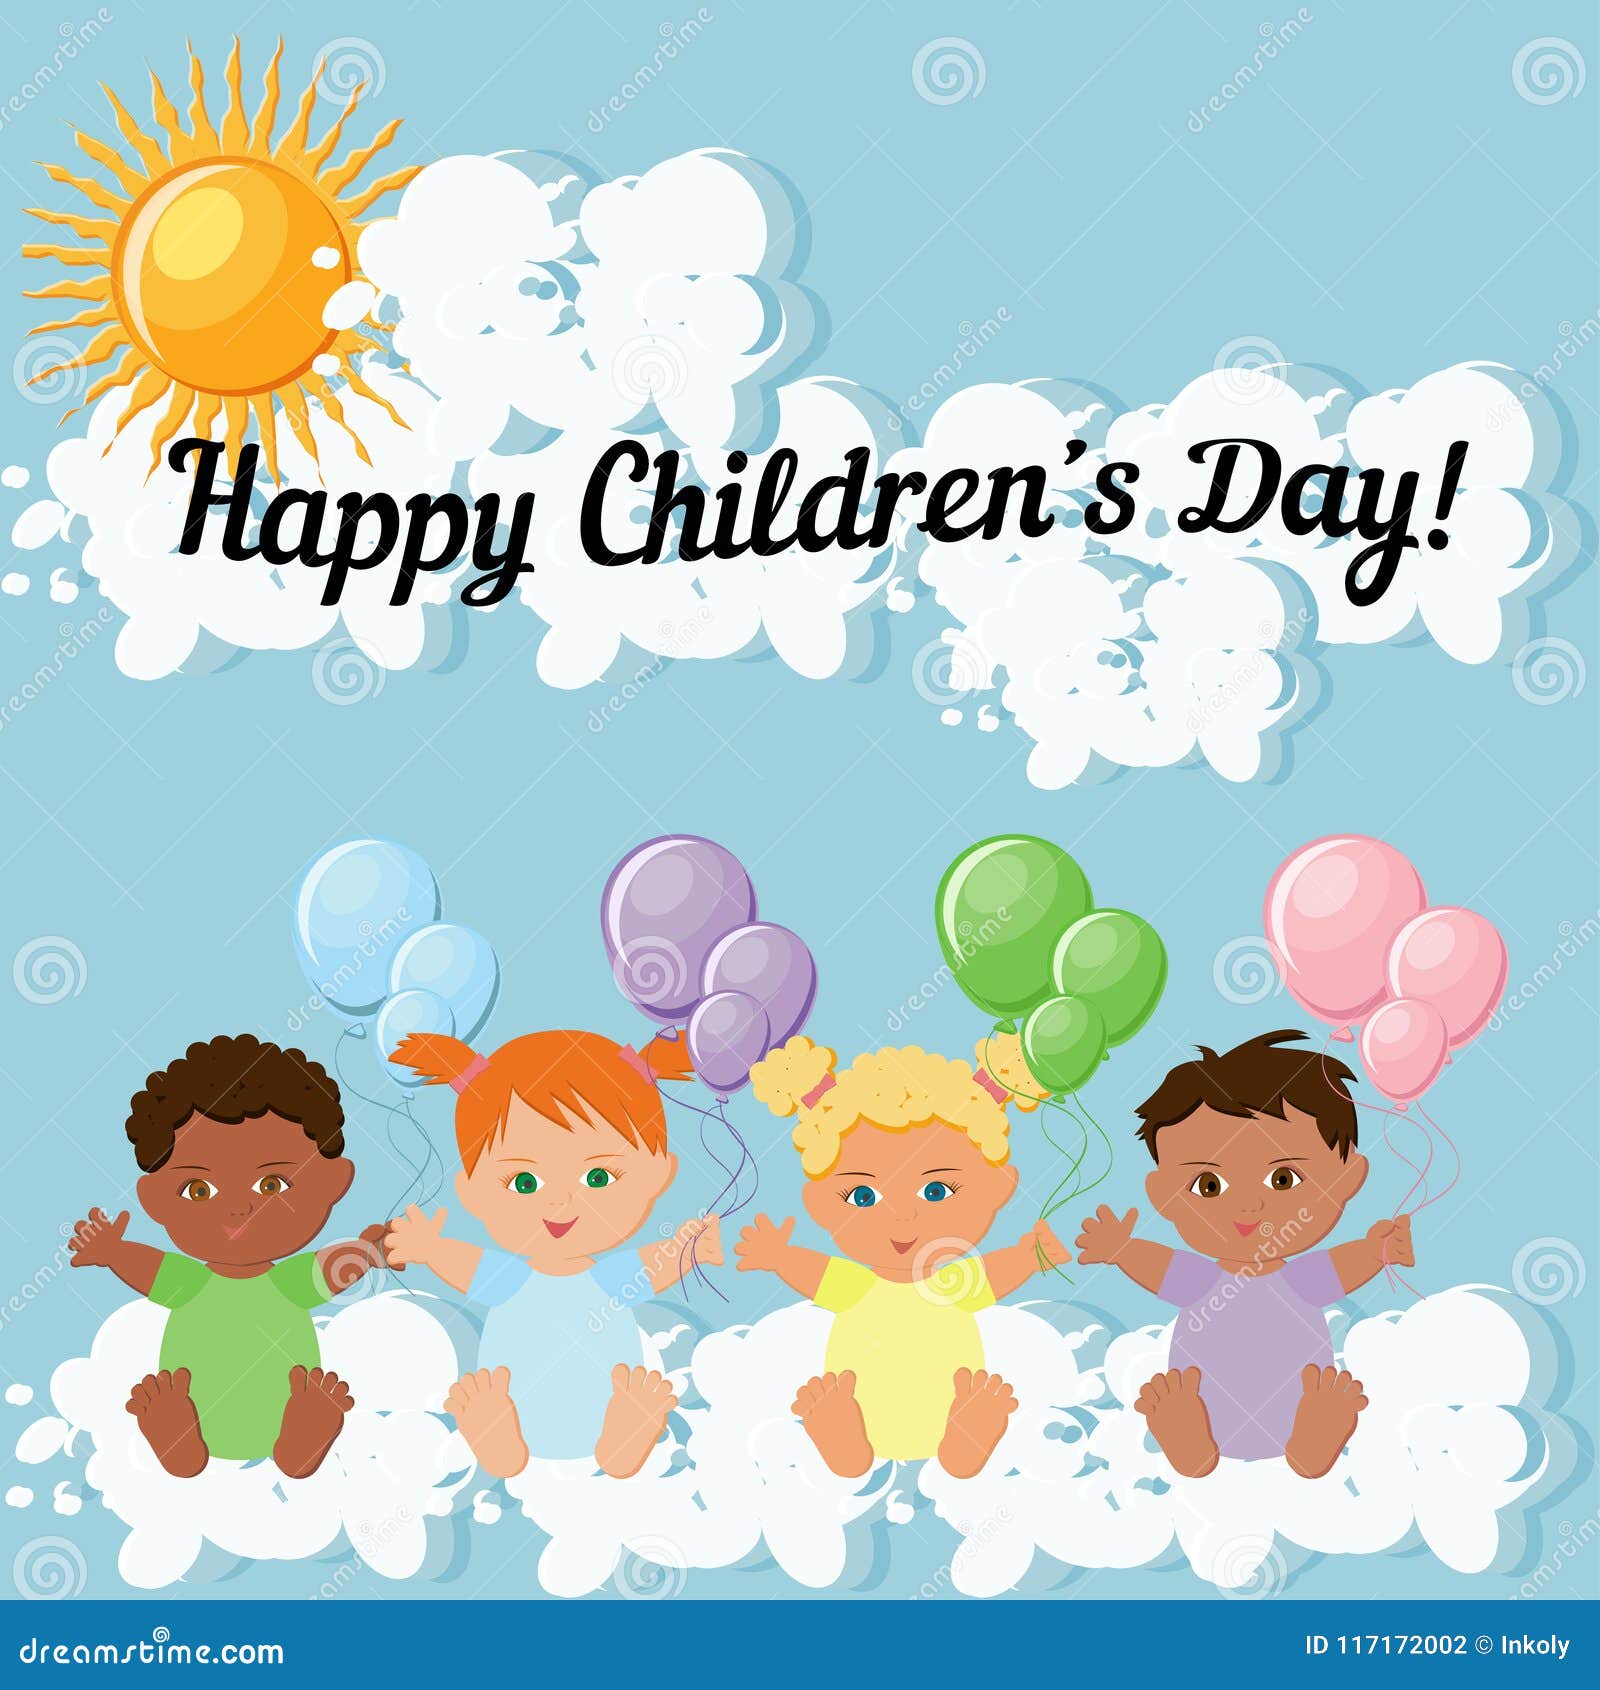 Happy Children Day Greeting Card Template with Kids Sitting on Clouds and  Holding Colorful Balloons, and Text. Stock Vector - Illustration of cartoon,  colorful: 117172002